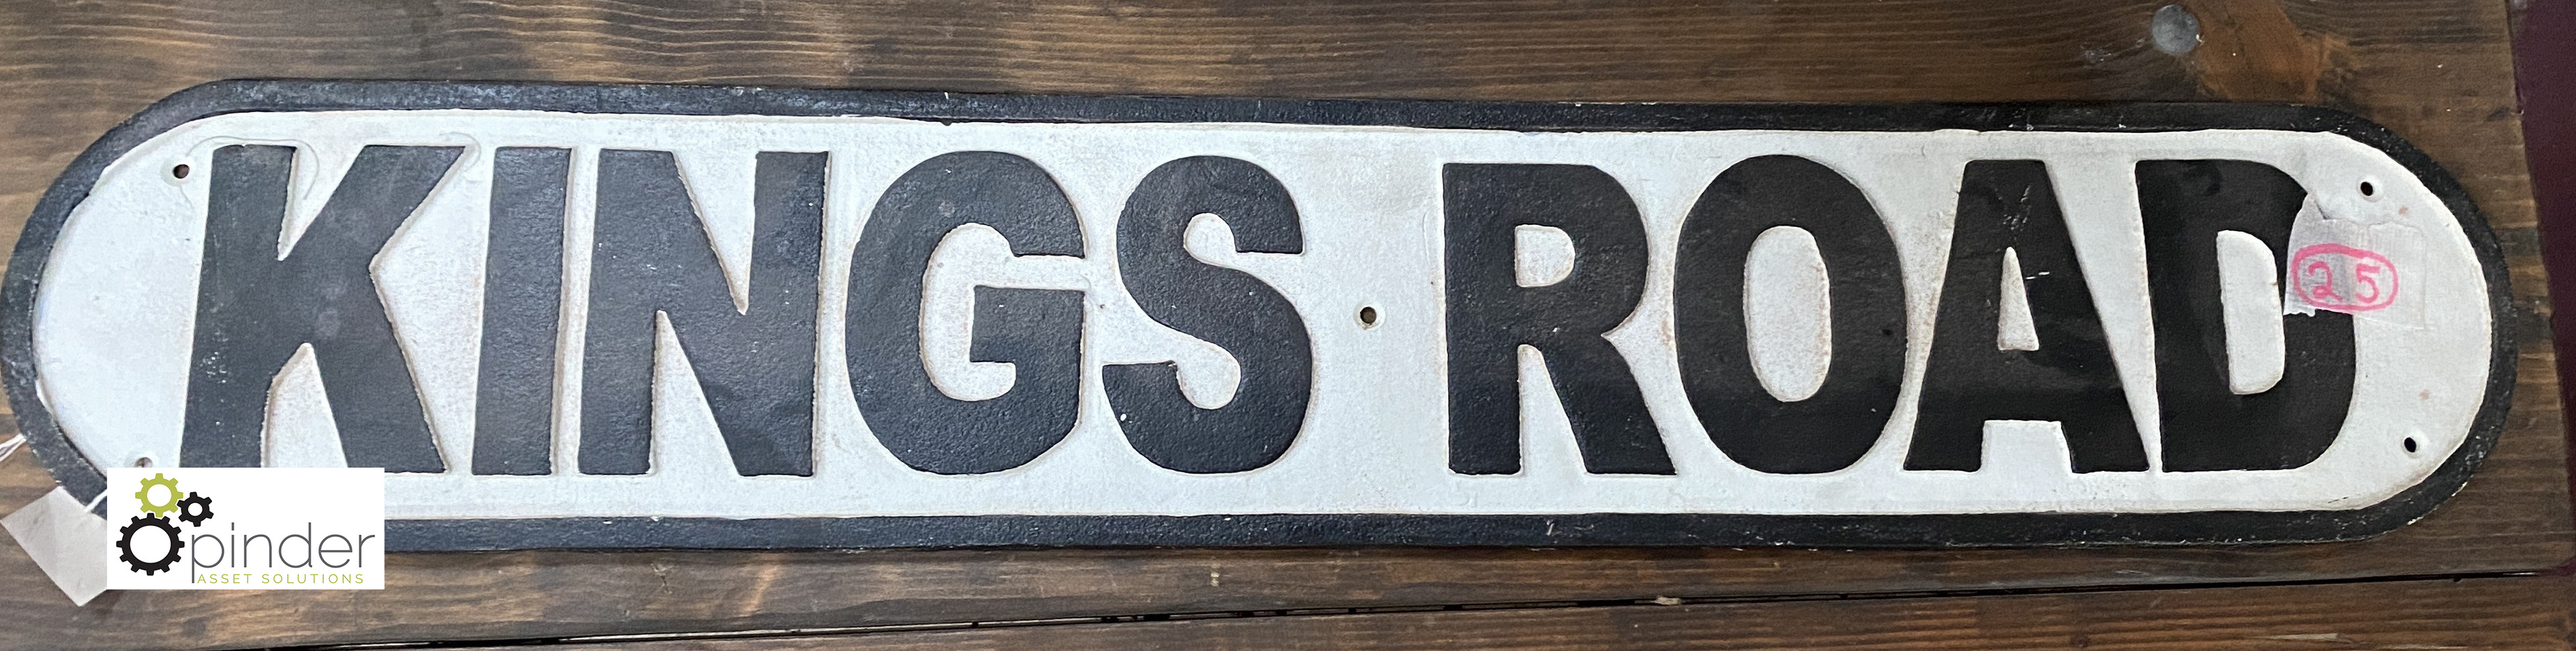 Reproduction ‘Kings Road’ Street Sign, 150mm high x 790mm long